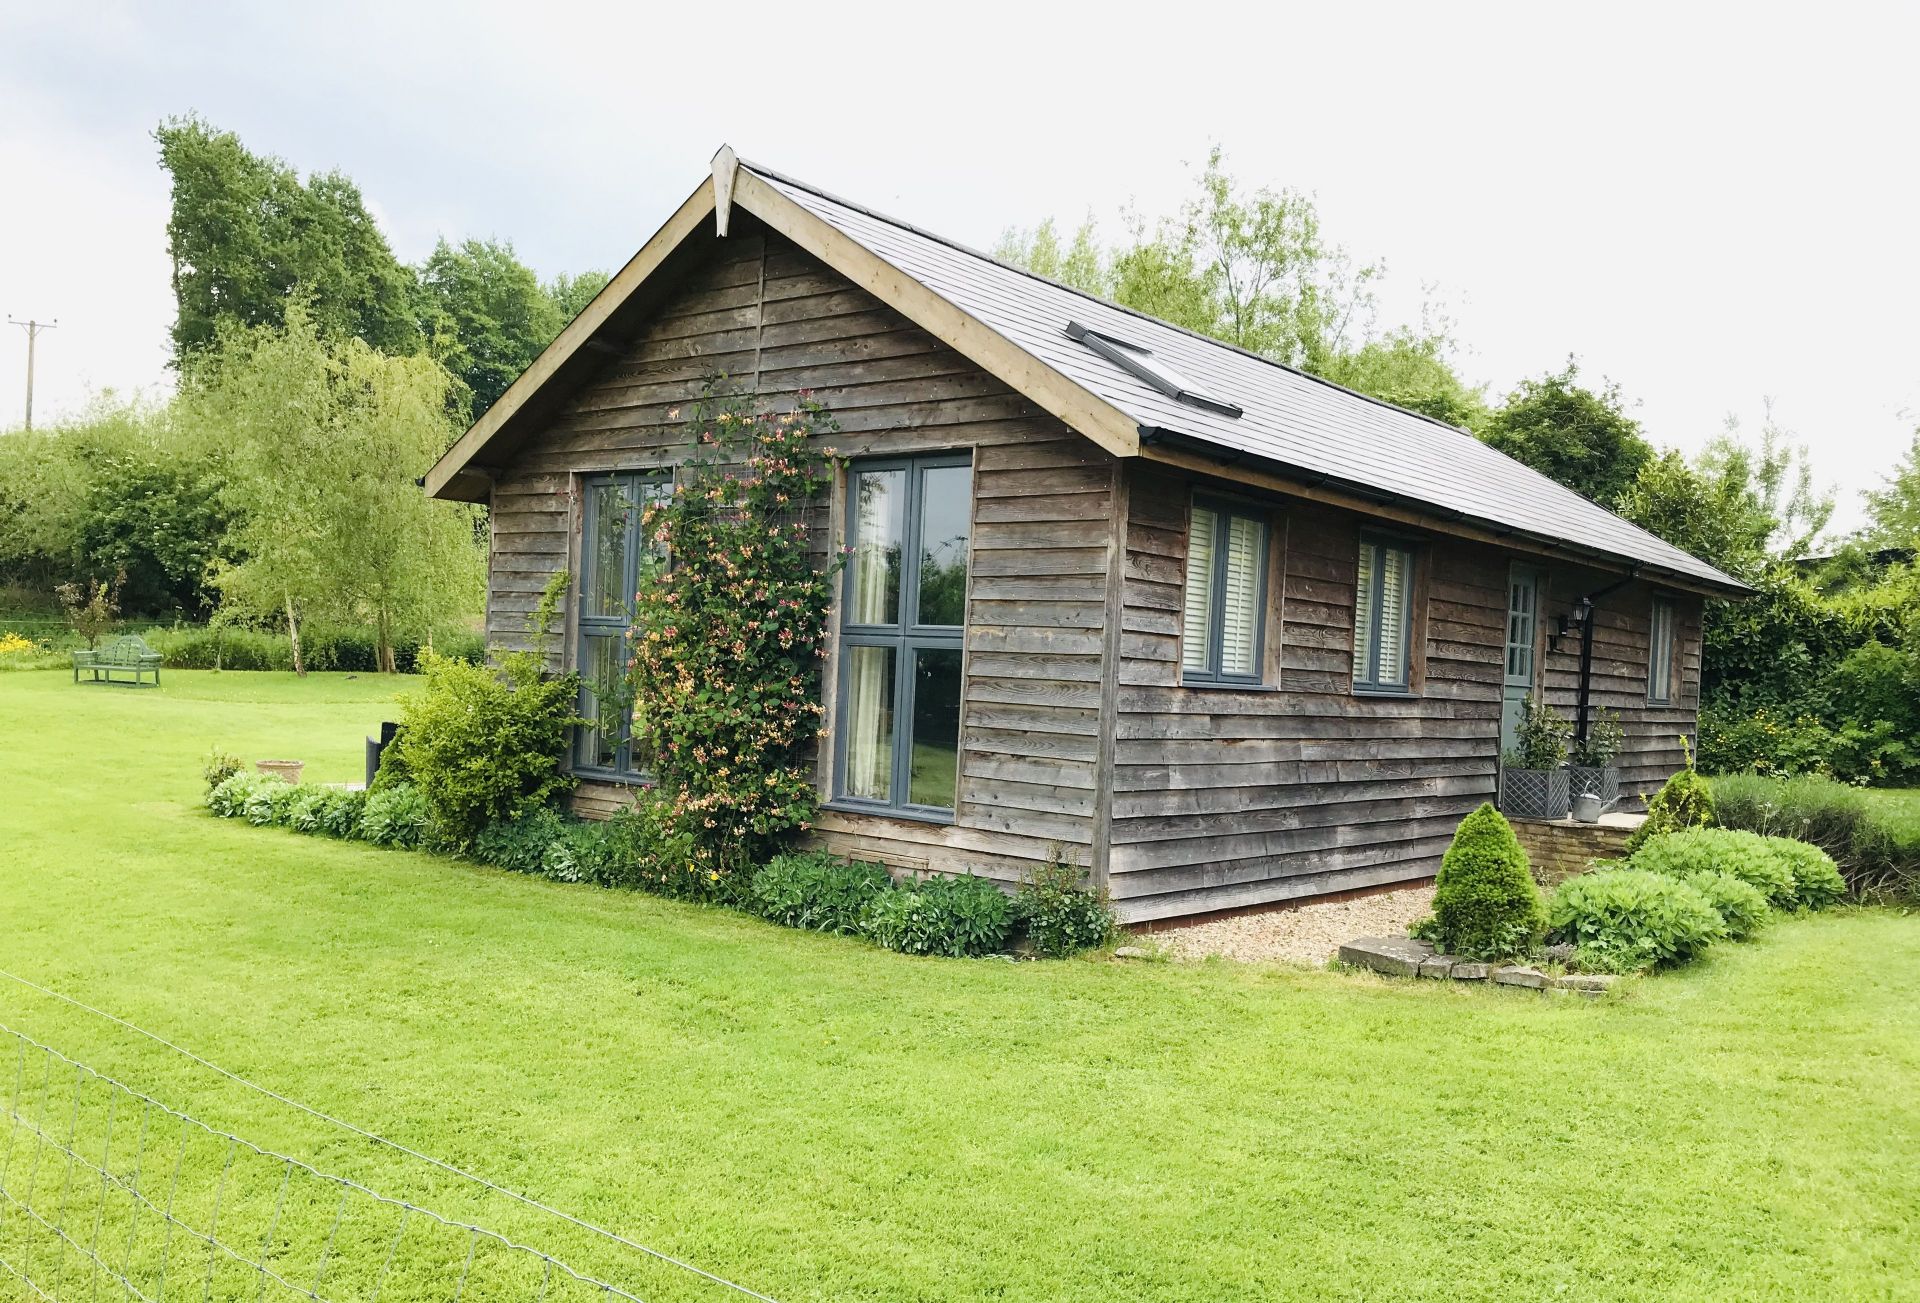 Details about a cottage Holiday at Larch Barn